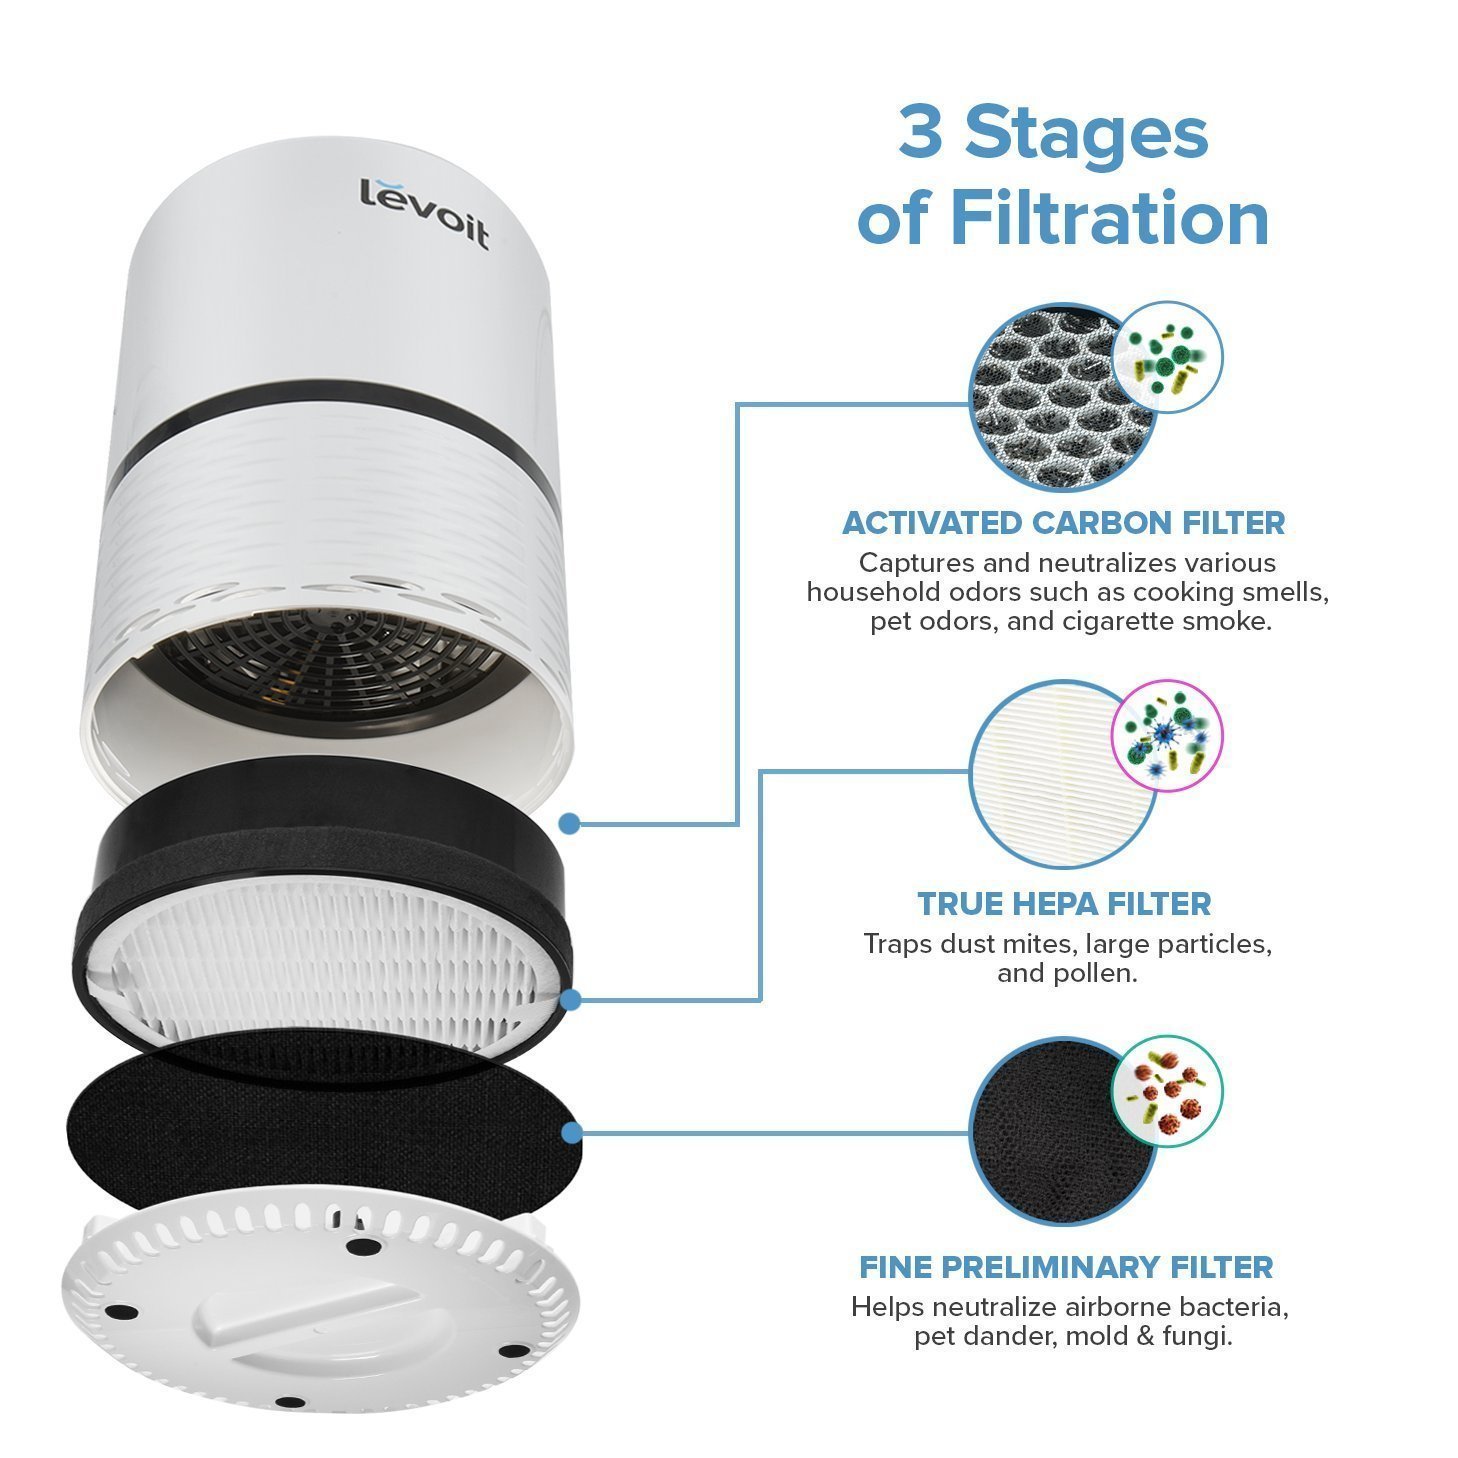 Levoit LV-H132 Air Purifier with True Hepa Filter for Smoke, Bacteria, and More - image 5 of 9